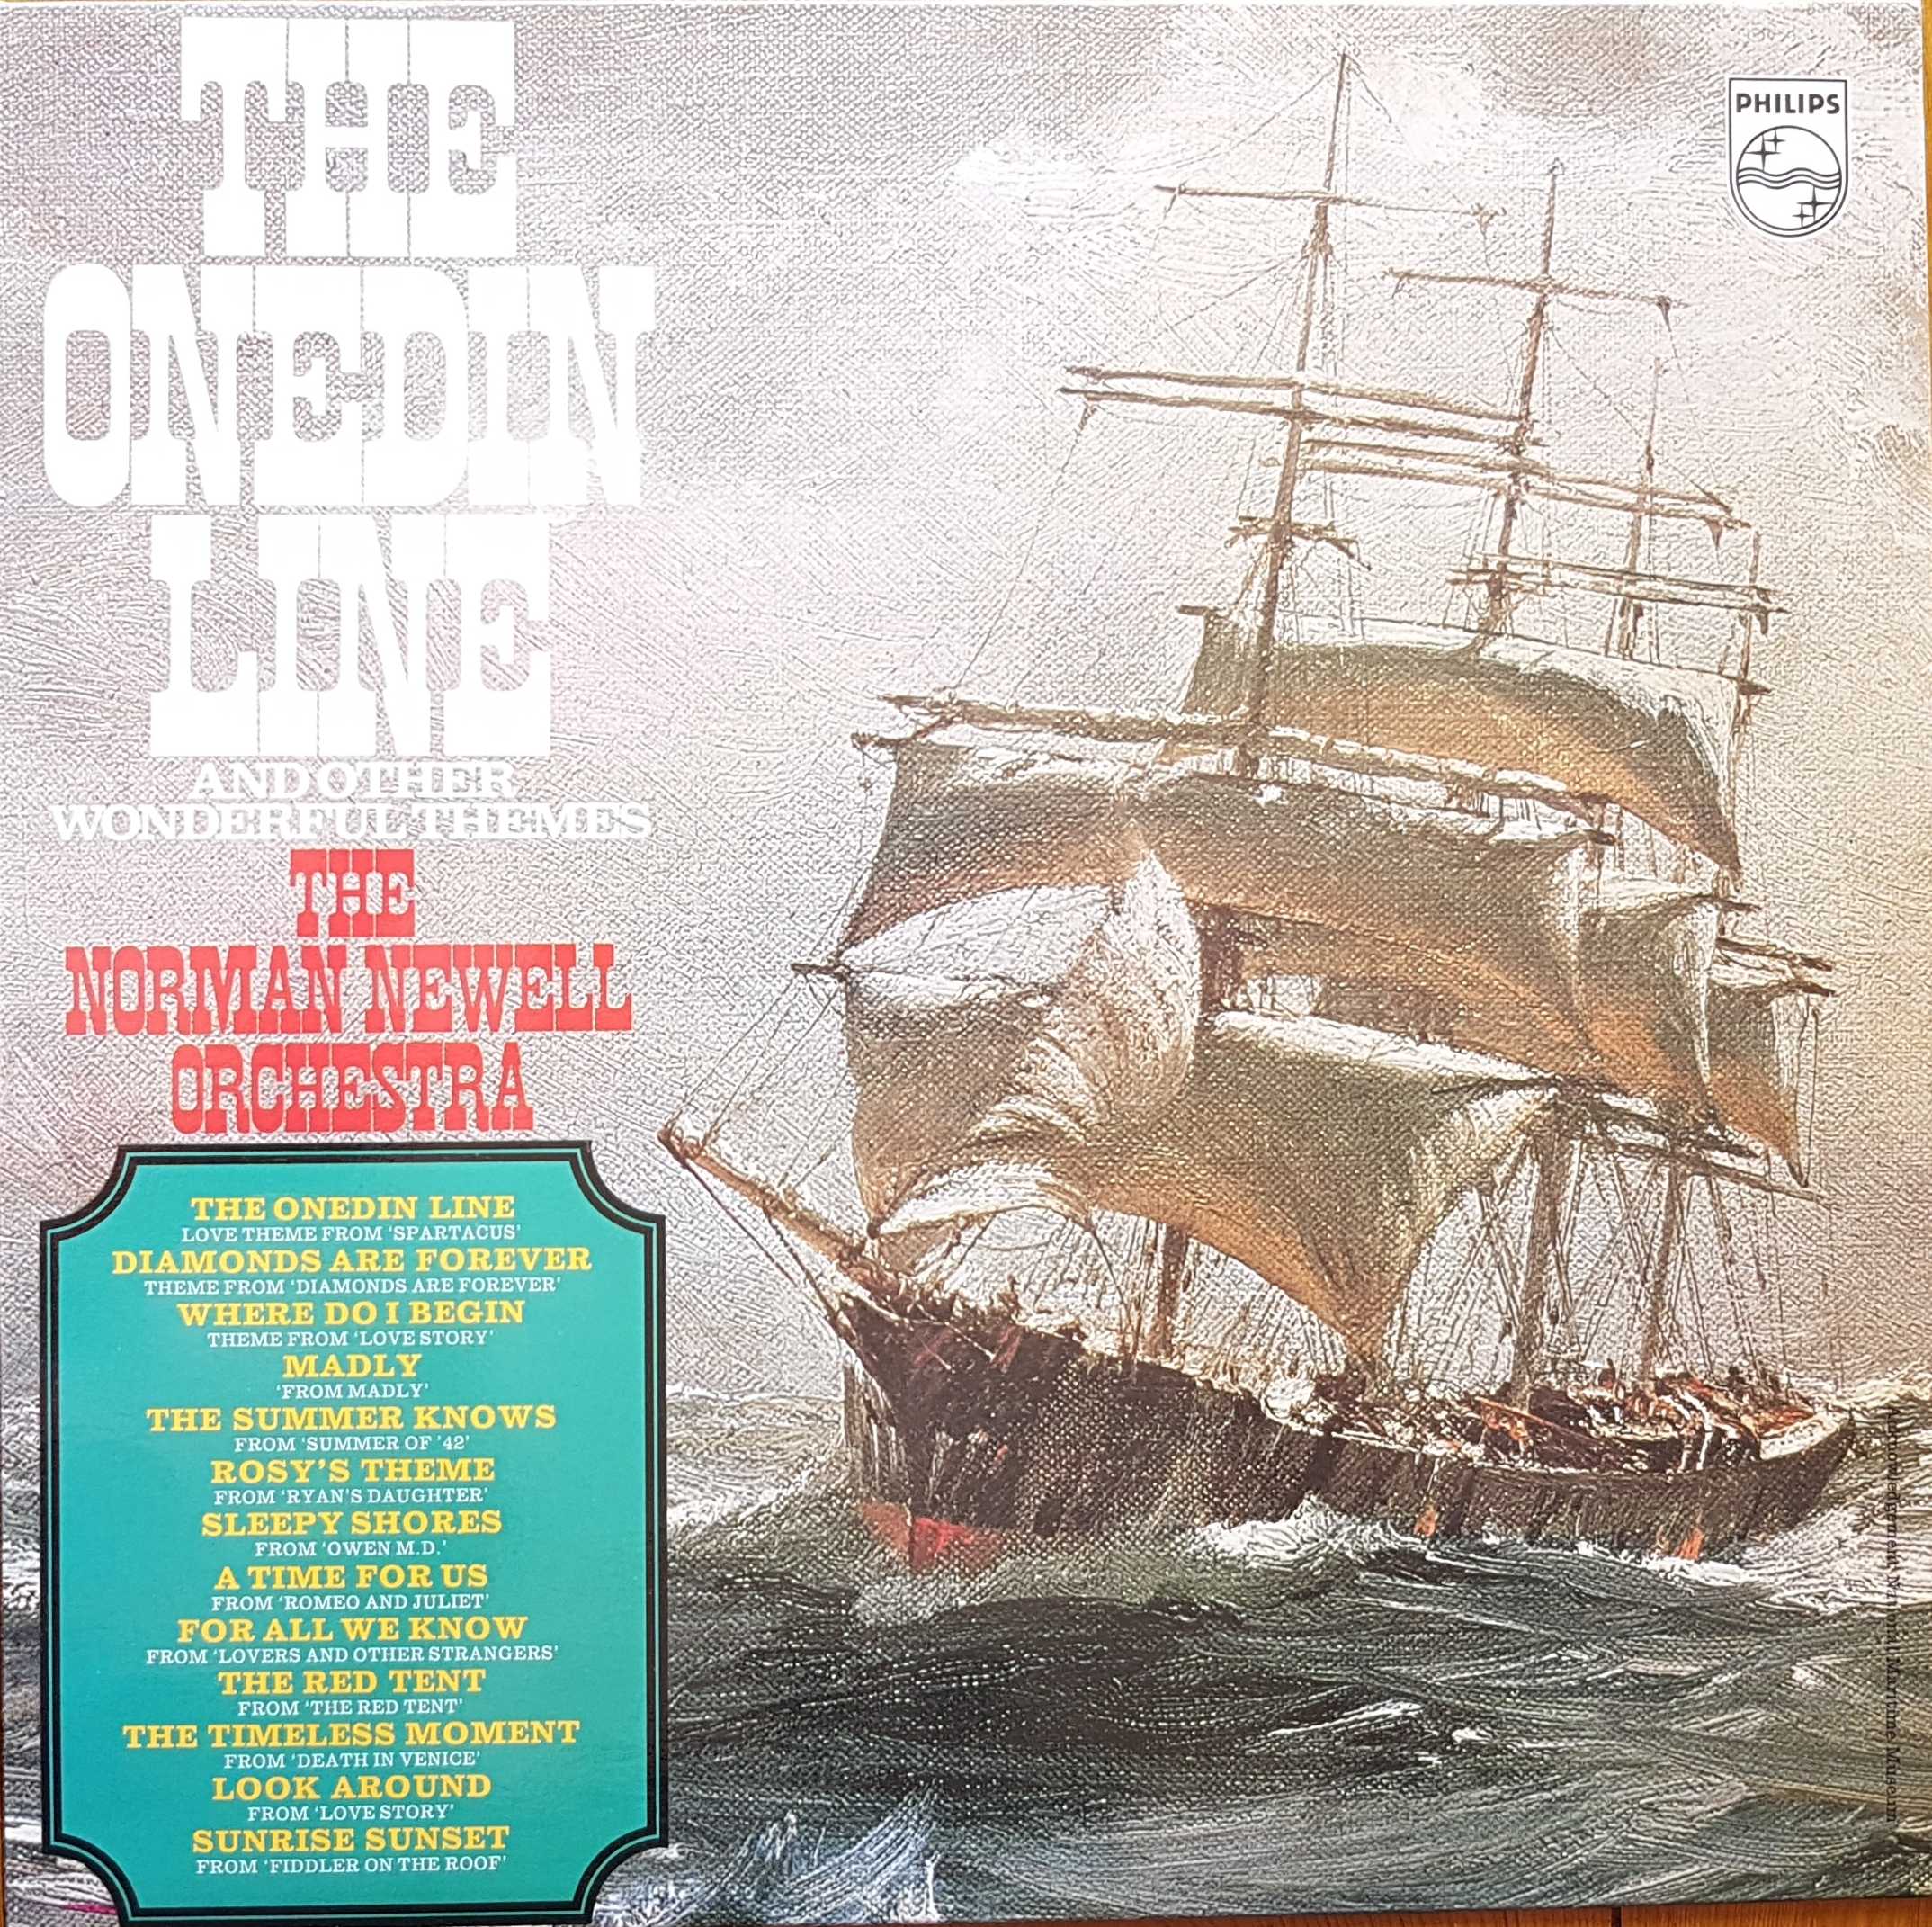 Picture of 6308 094 The Onedin Line and other wonderful themes by artist Various from ITV, Channel 4 and Channel 5 albums library